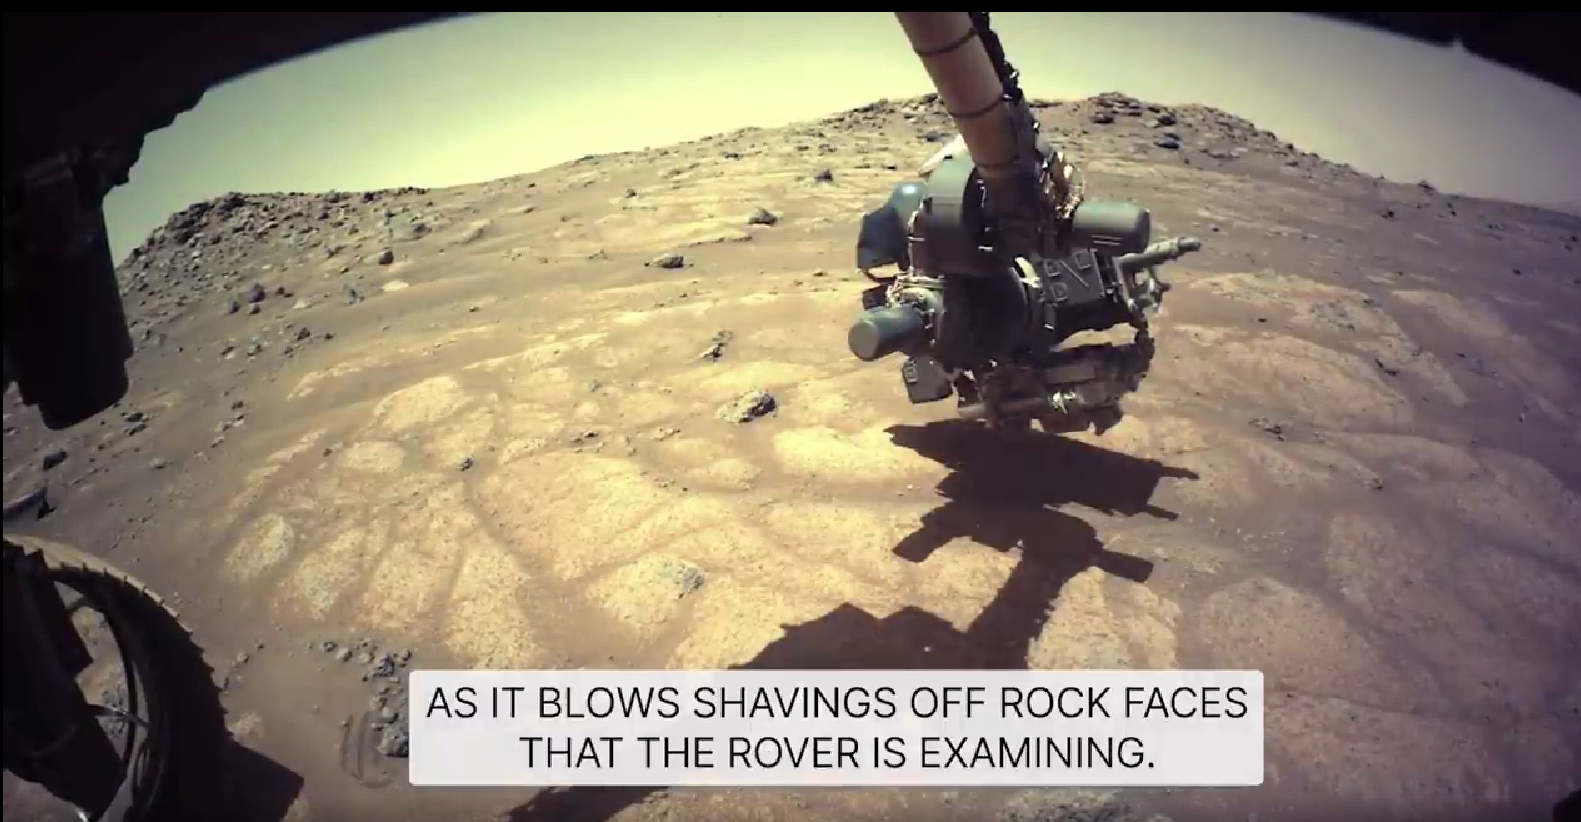 AS IT BLOWS SHAVINGS OFF ROCK FACES THAT THE ROVER IS EXAMINING.